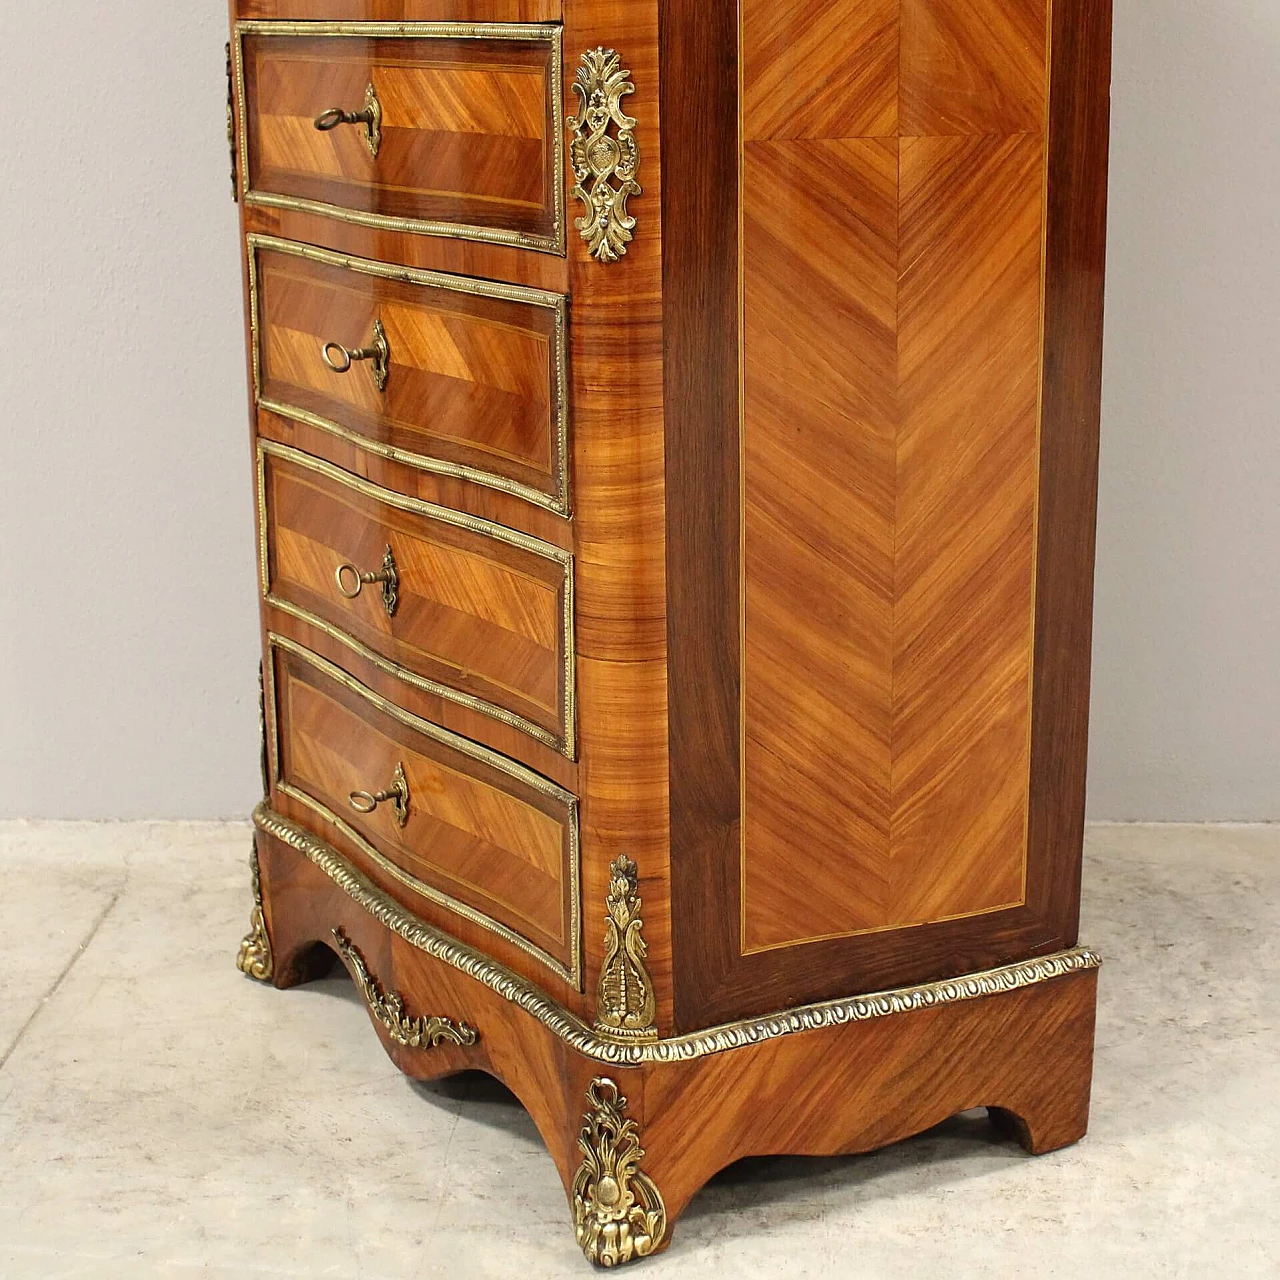 Napoleon III secretaire in bois de rose, rosewood inlay and gilded bronze with marble top, 19th century 3